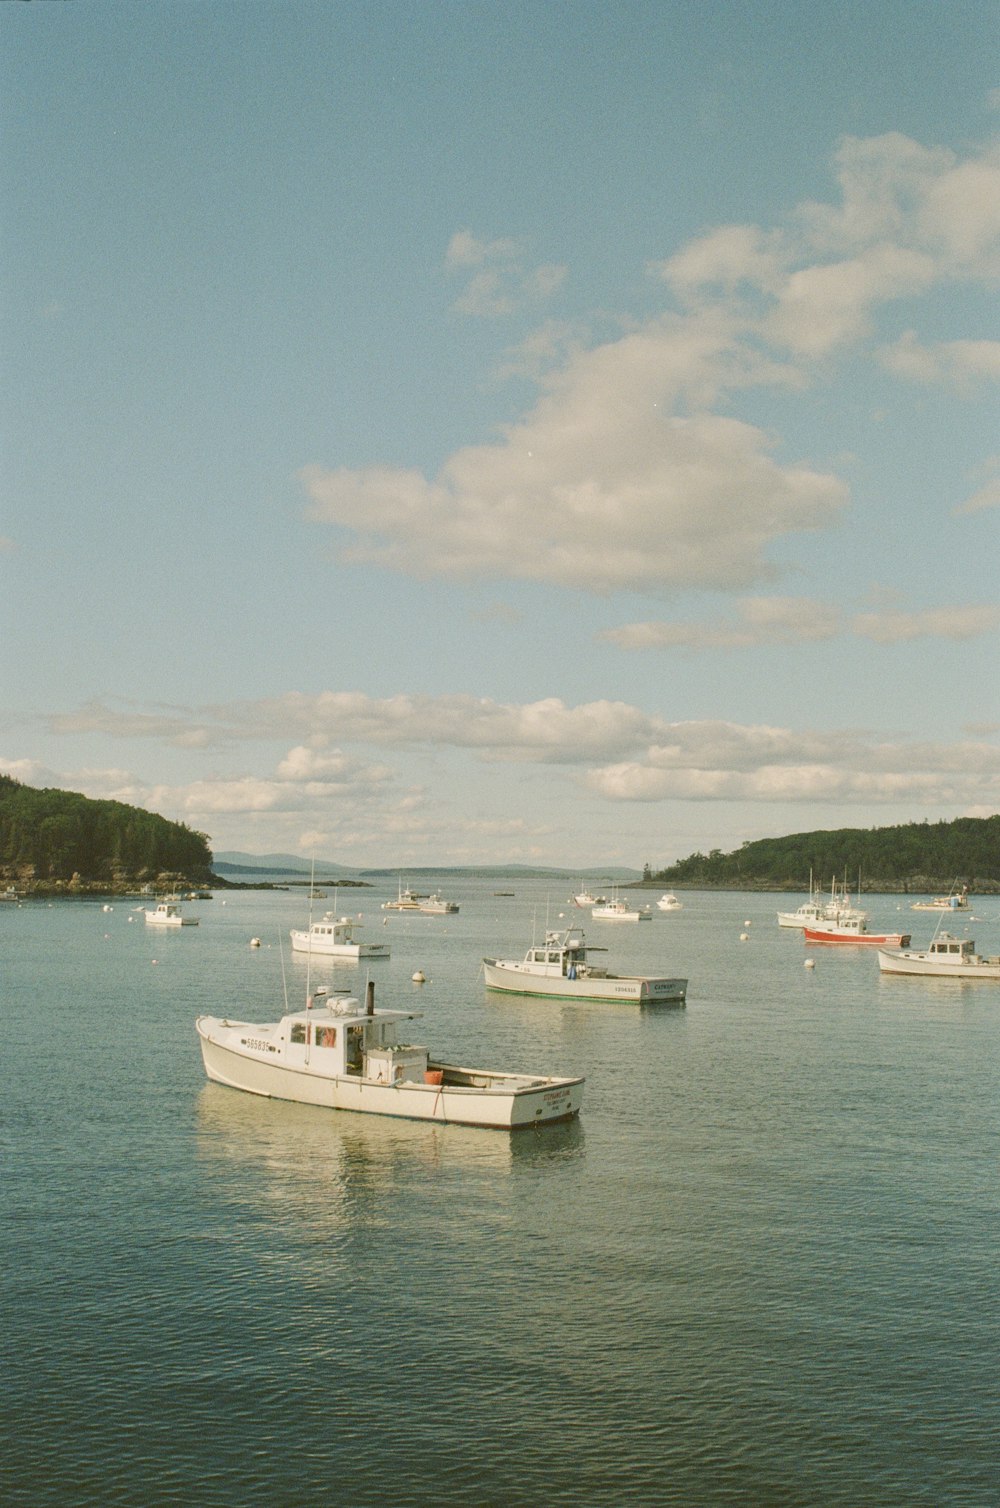 a group of boats on a body of water